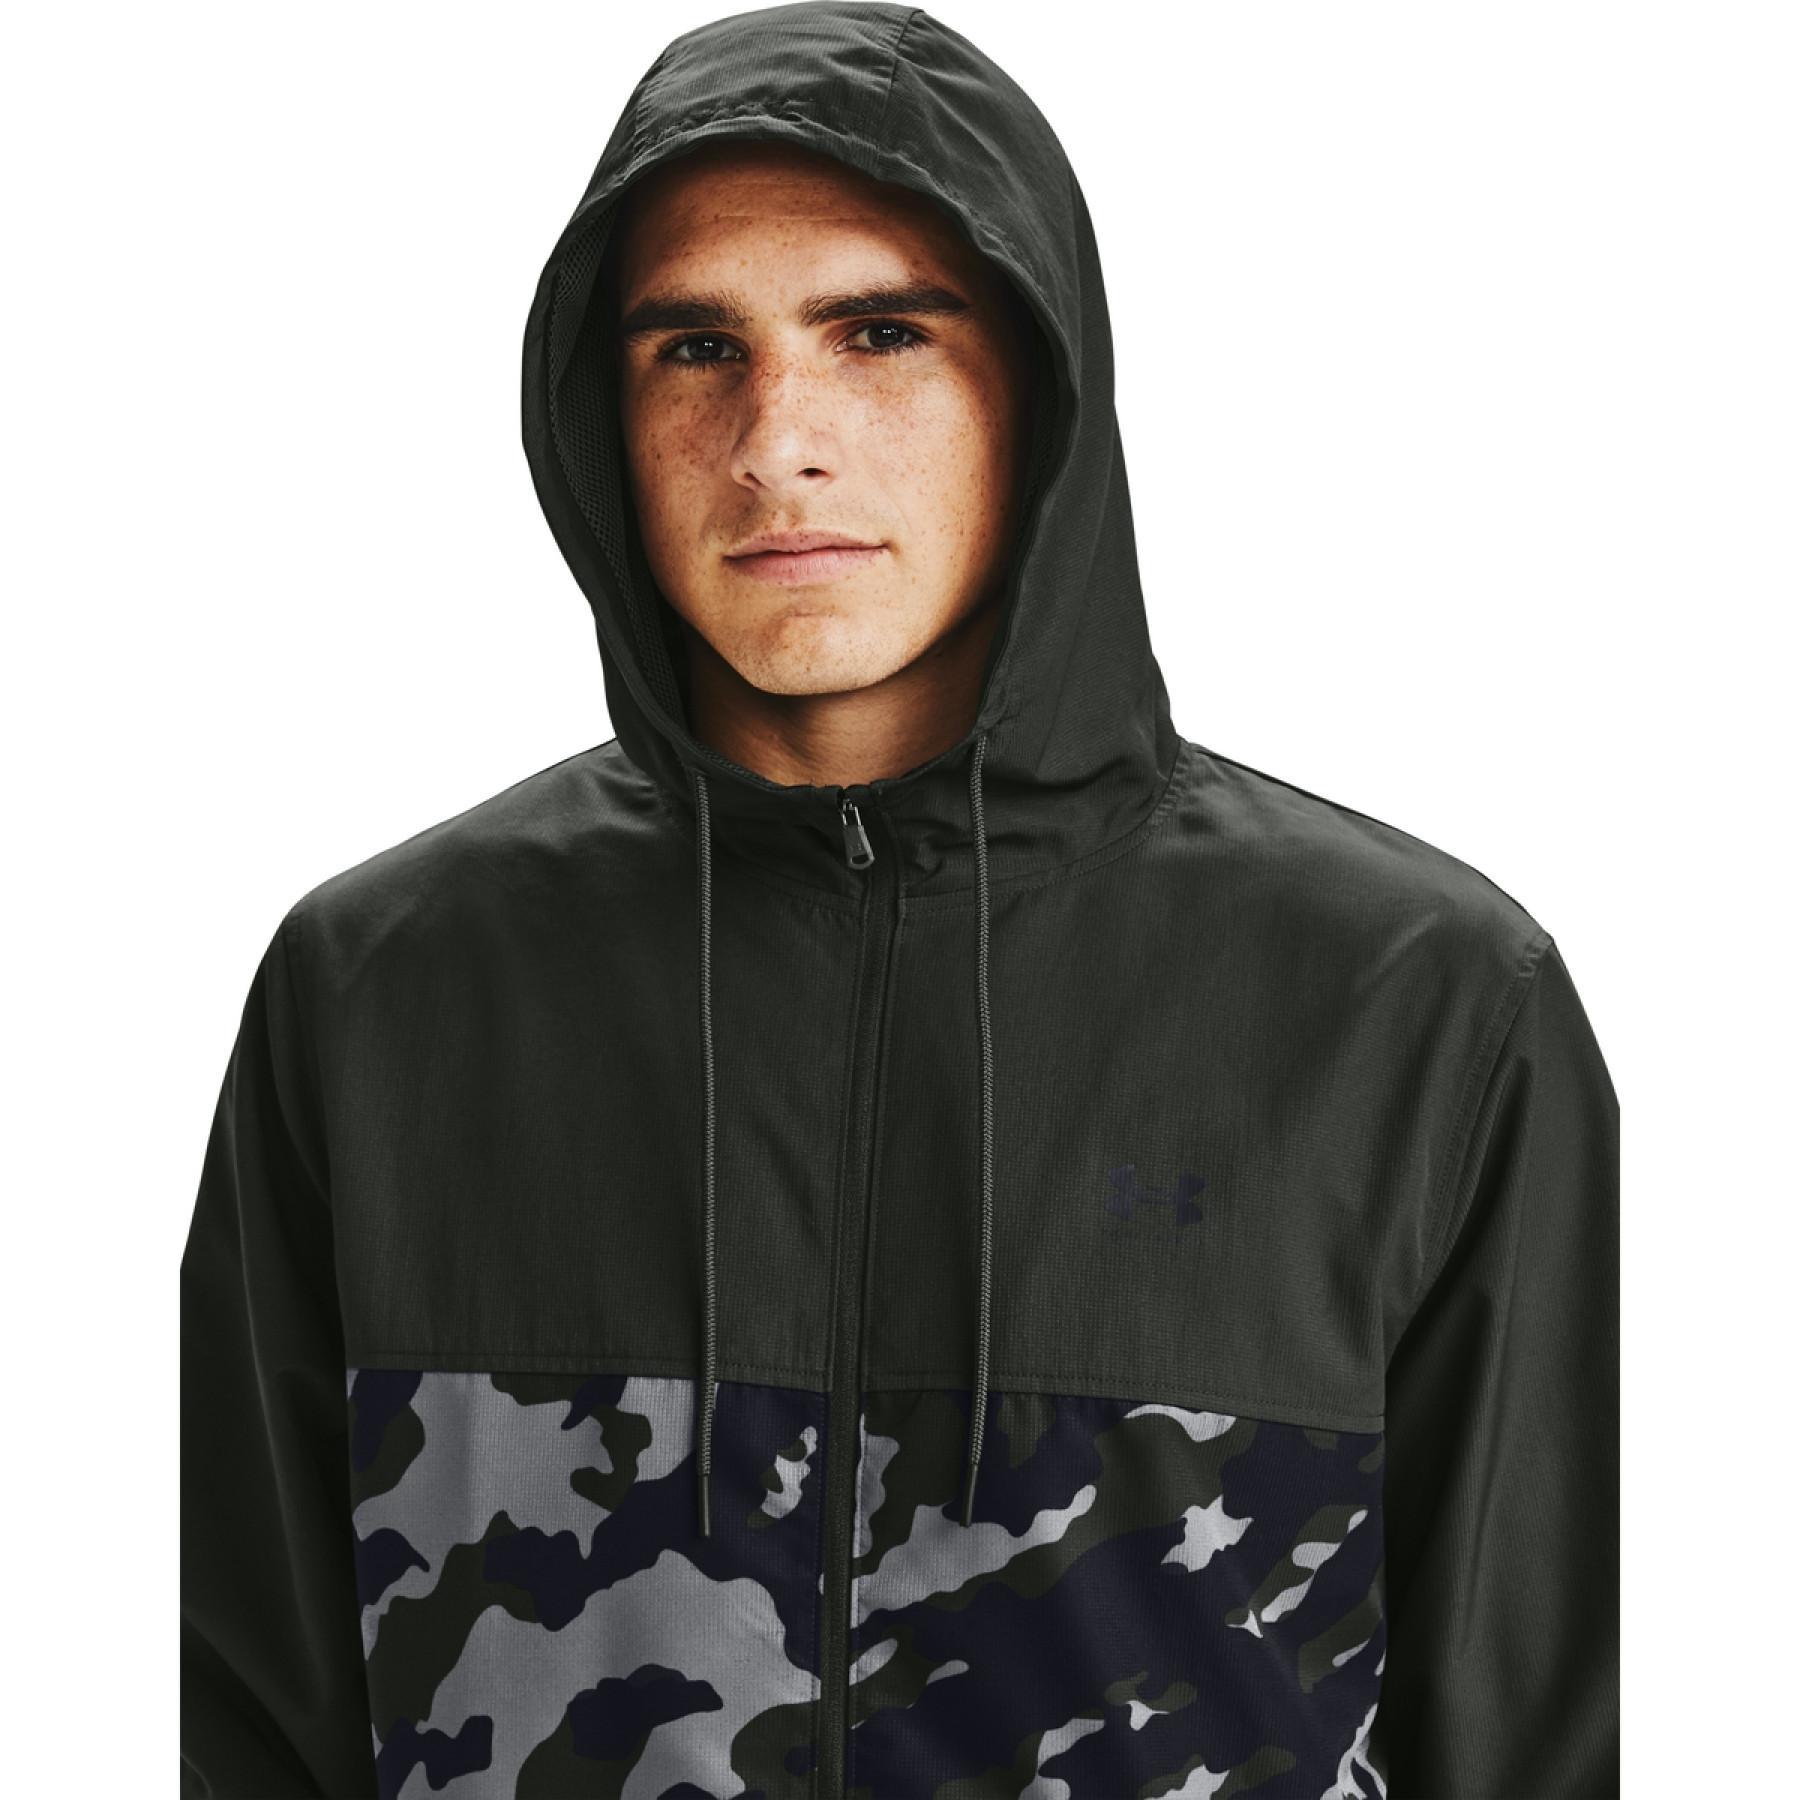 Chaqueta Under Armour coupe-vent Sportstyle Wind SI